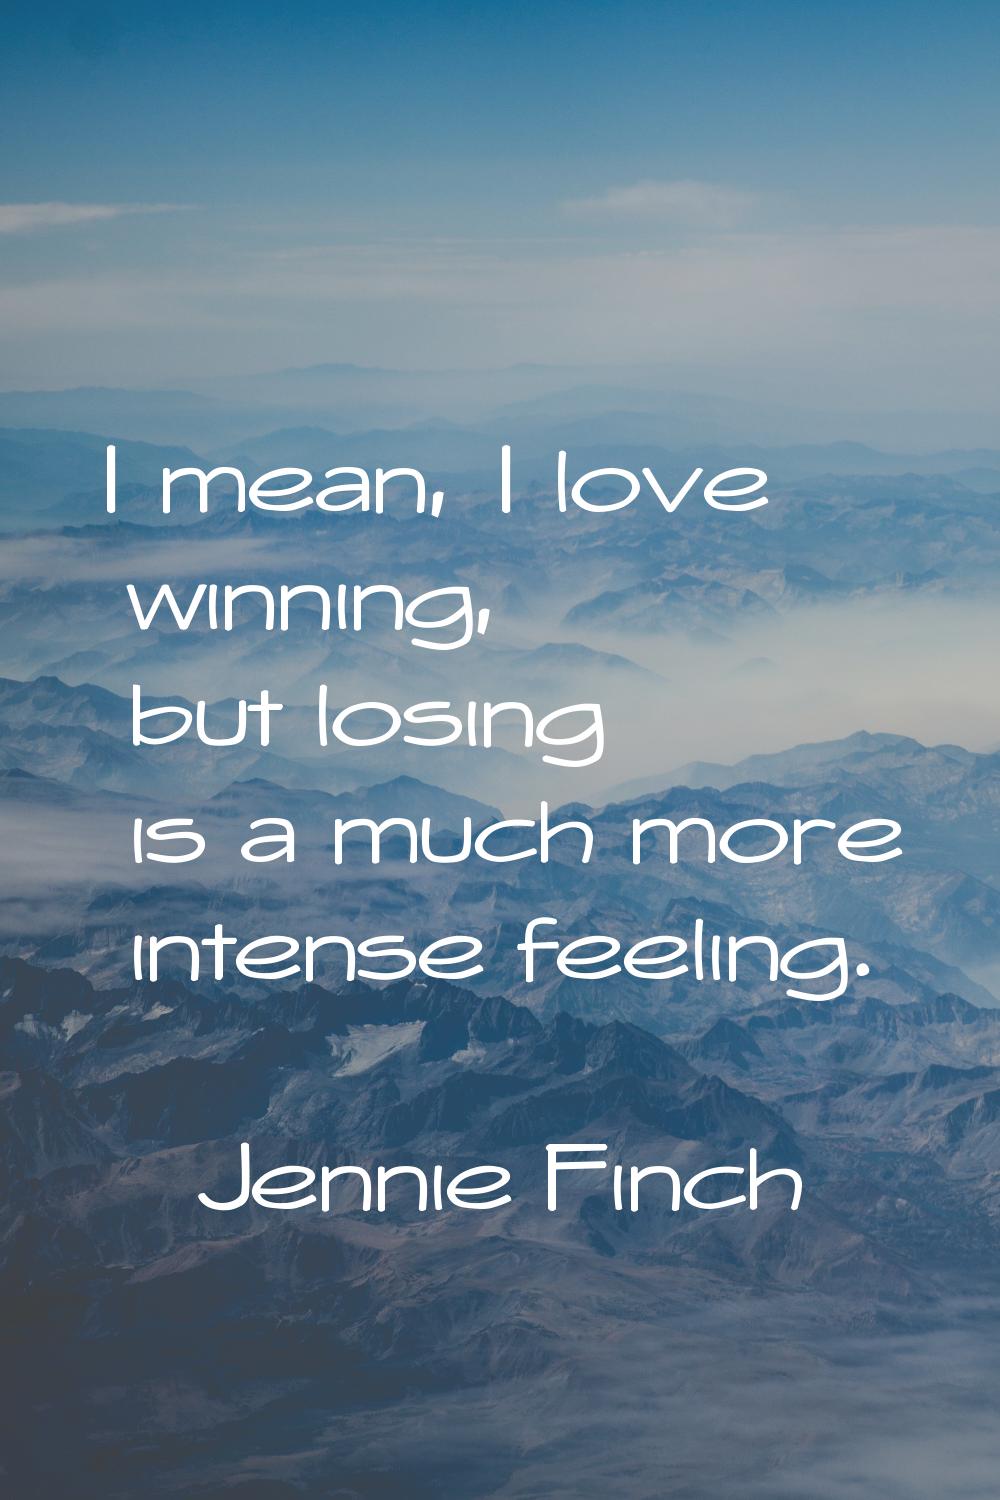 I mean, I love winning, but losing is a much more intense feeling.